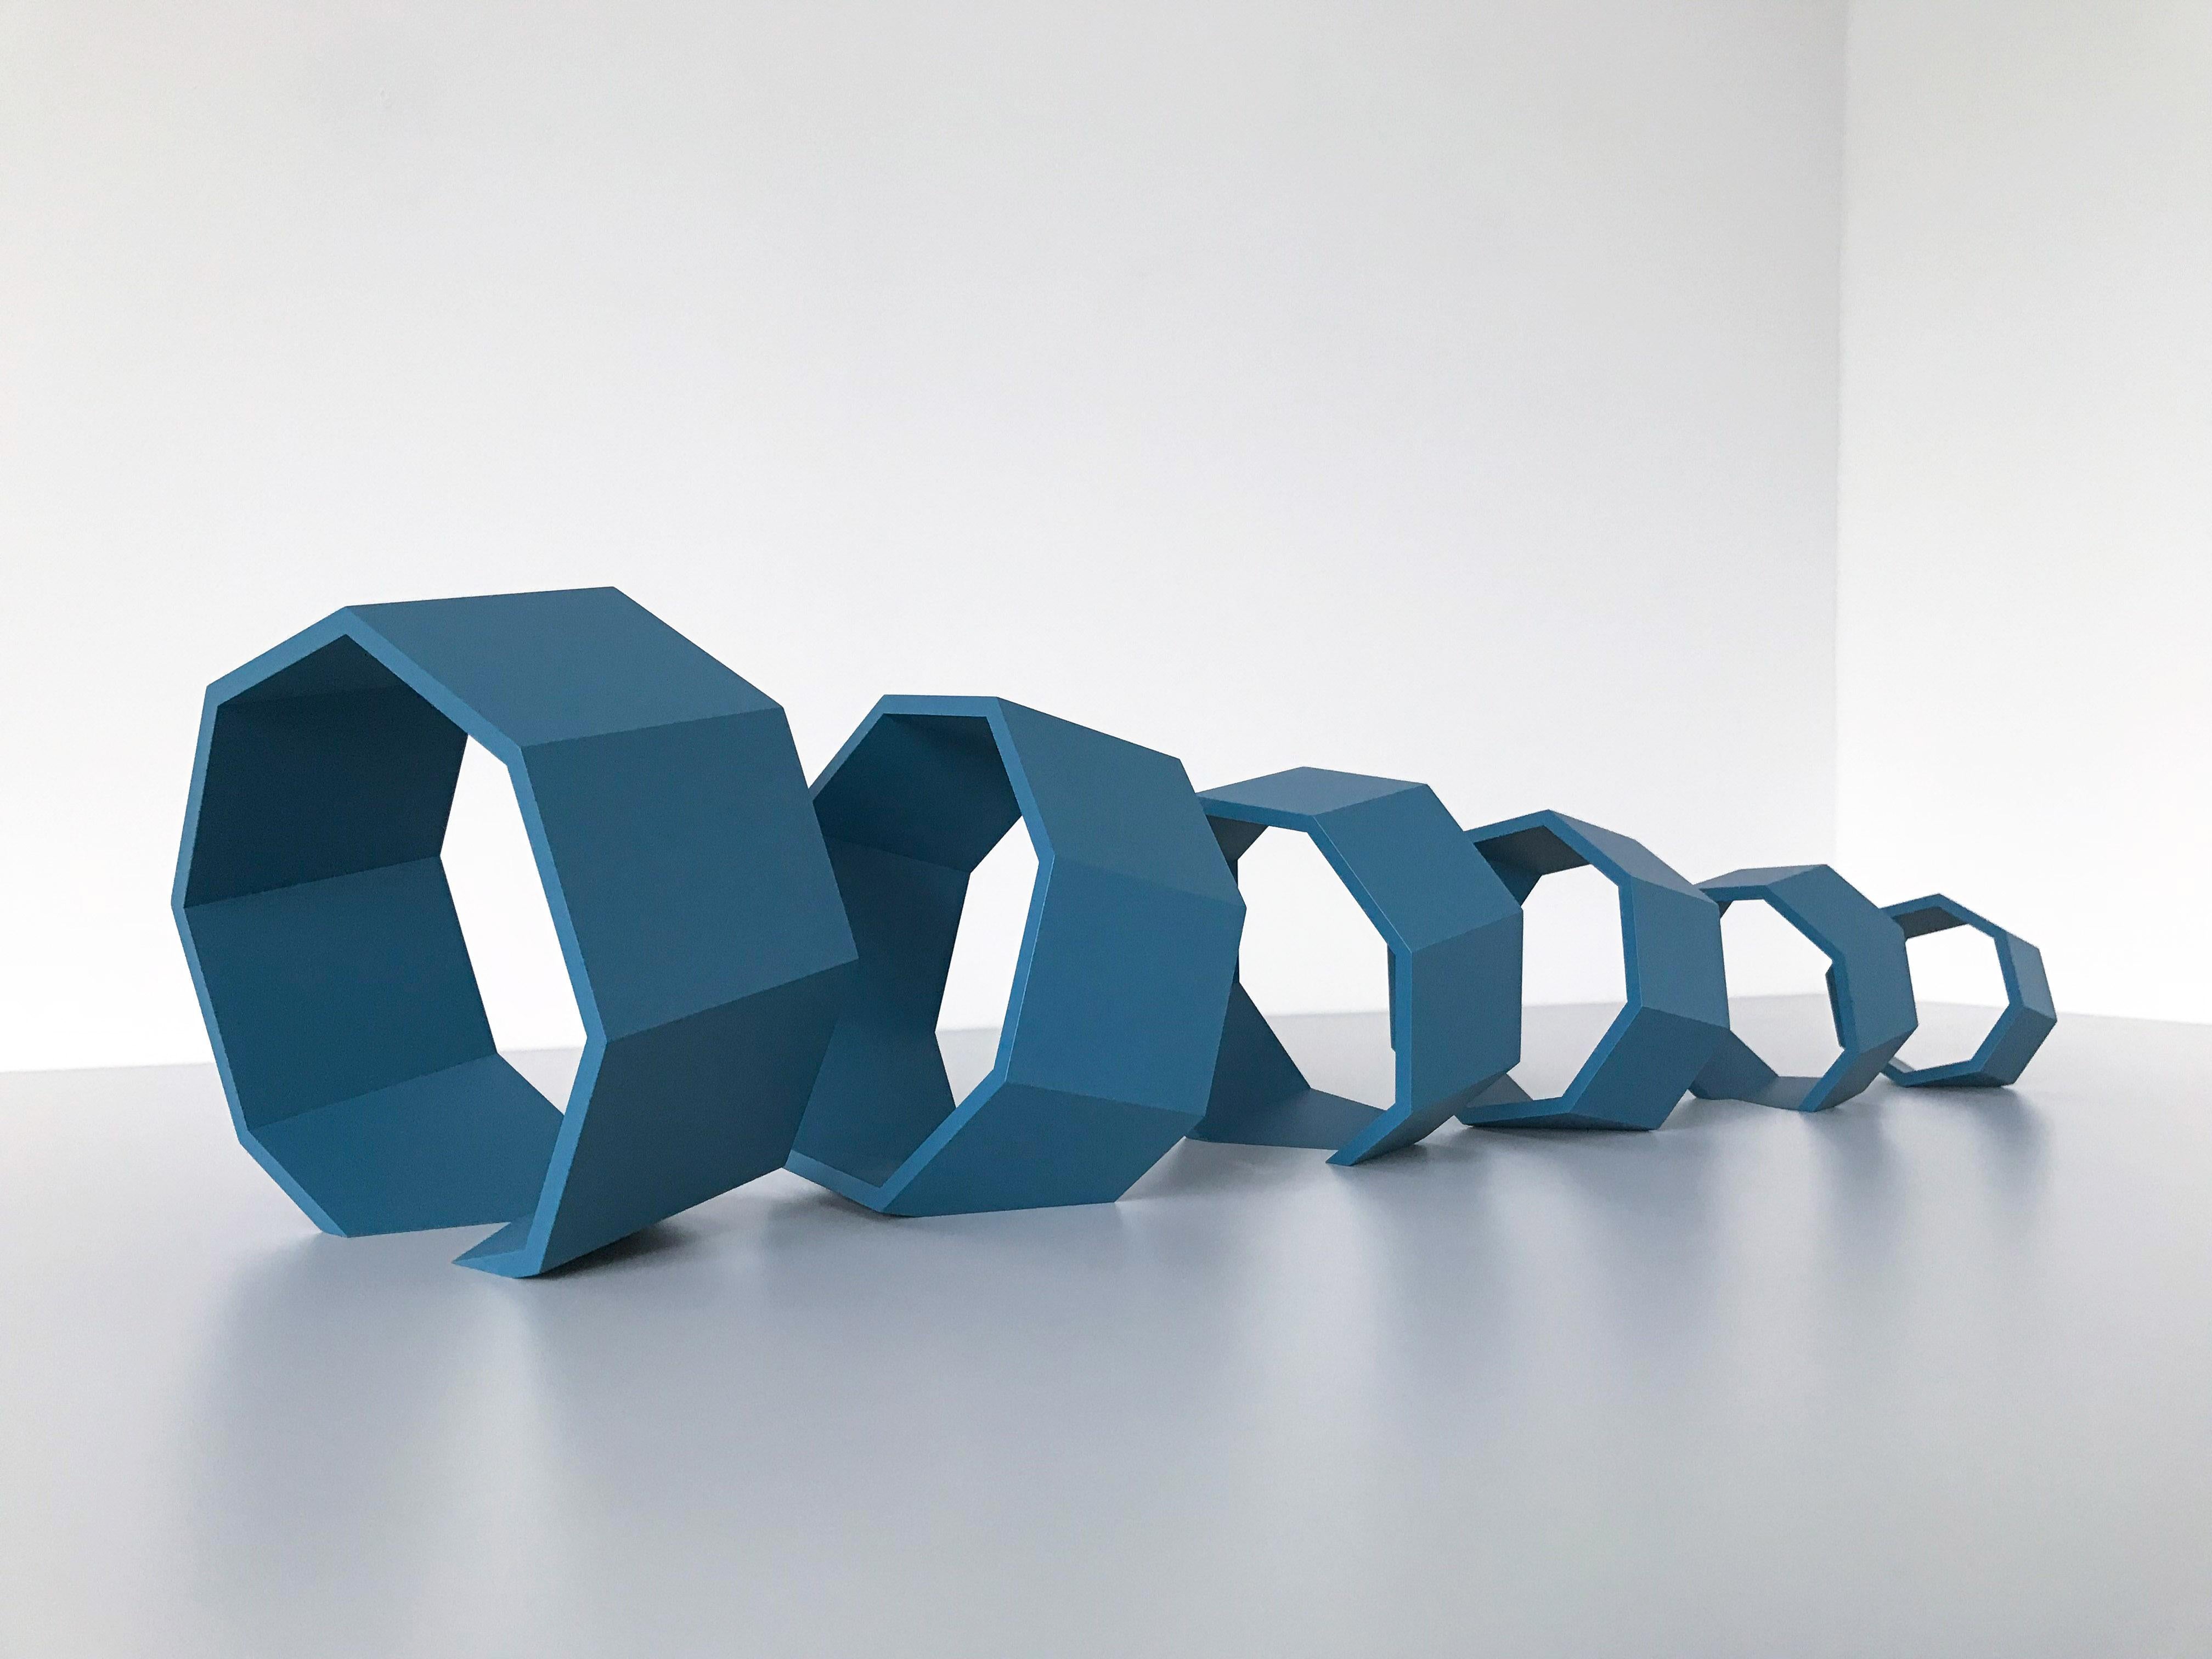 Untitled (blue octagons), Geometrical Abstract Sculpture, 2018 For Sale 1